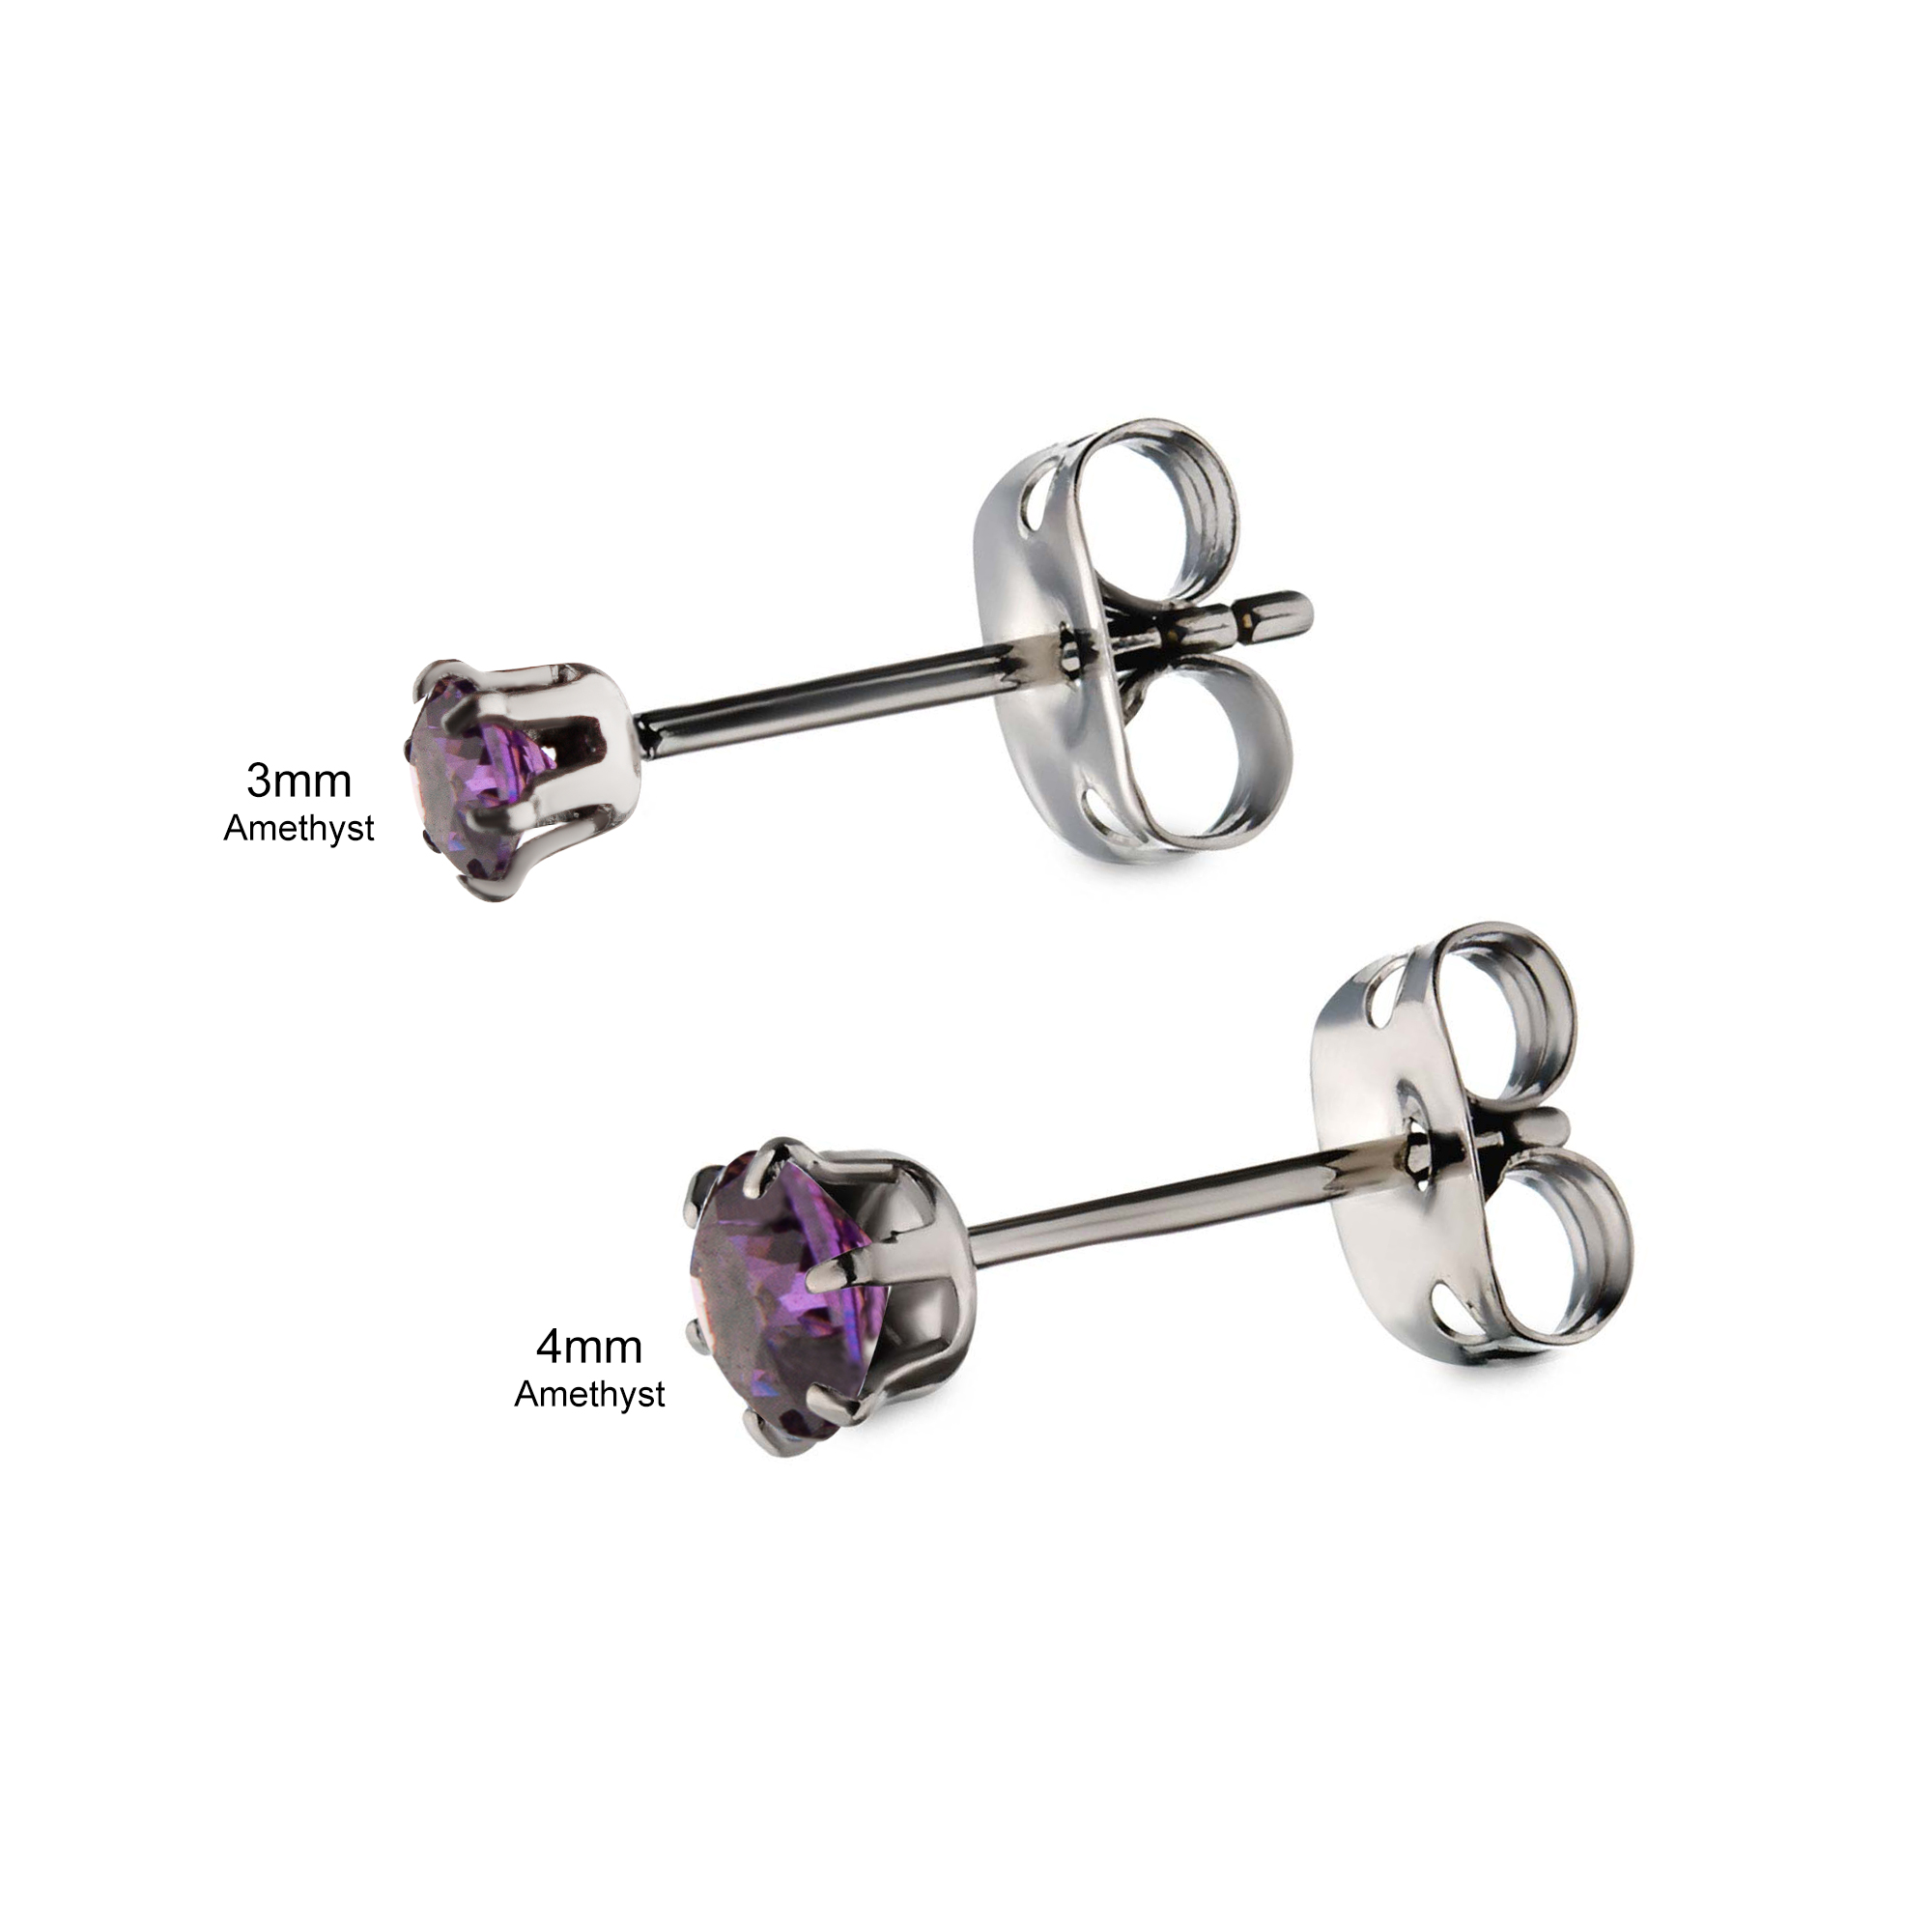 20g Titanium Post and Butterfly Back with Prong Set CZ Stud Earrings Image 5 Spath Jewelers Bartow, FL